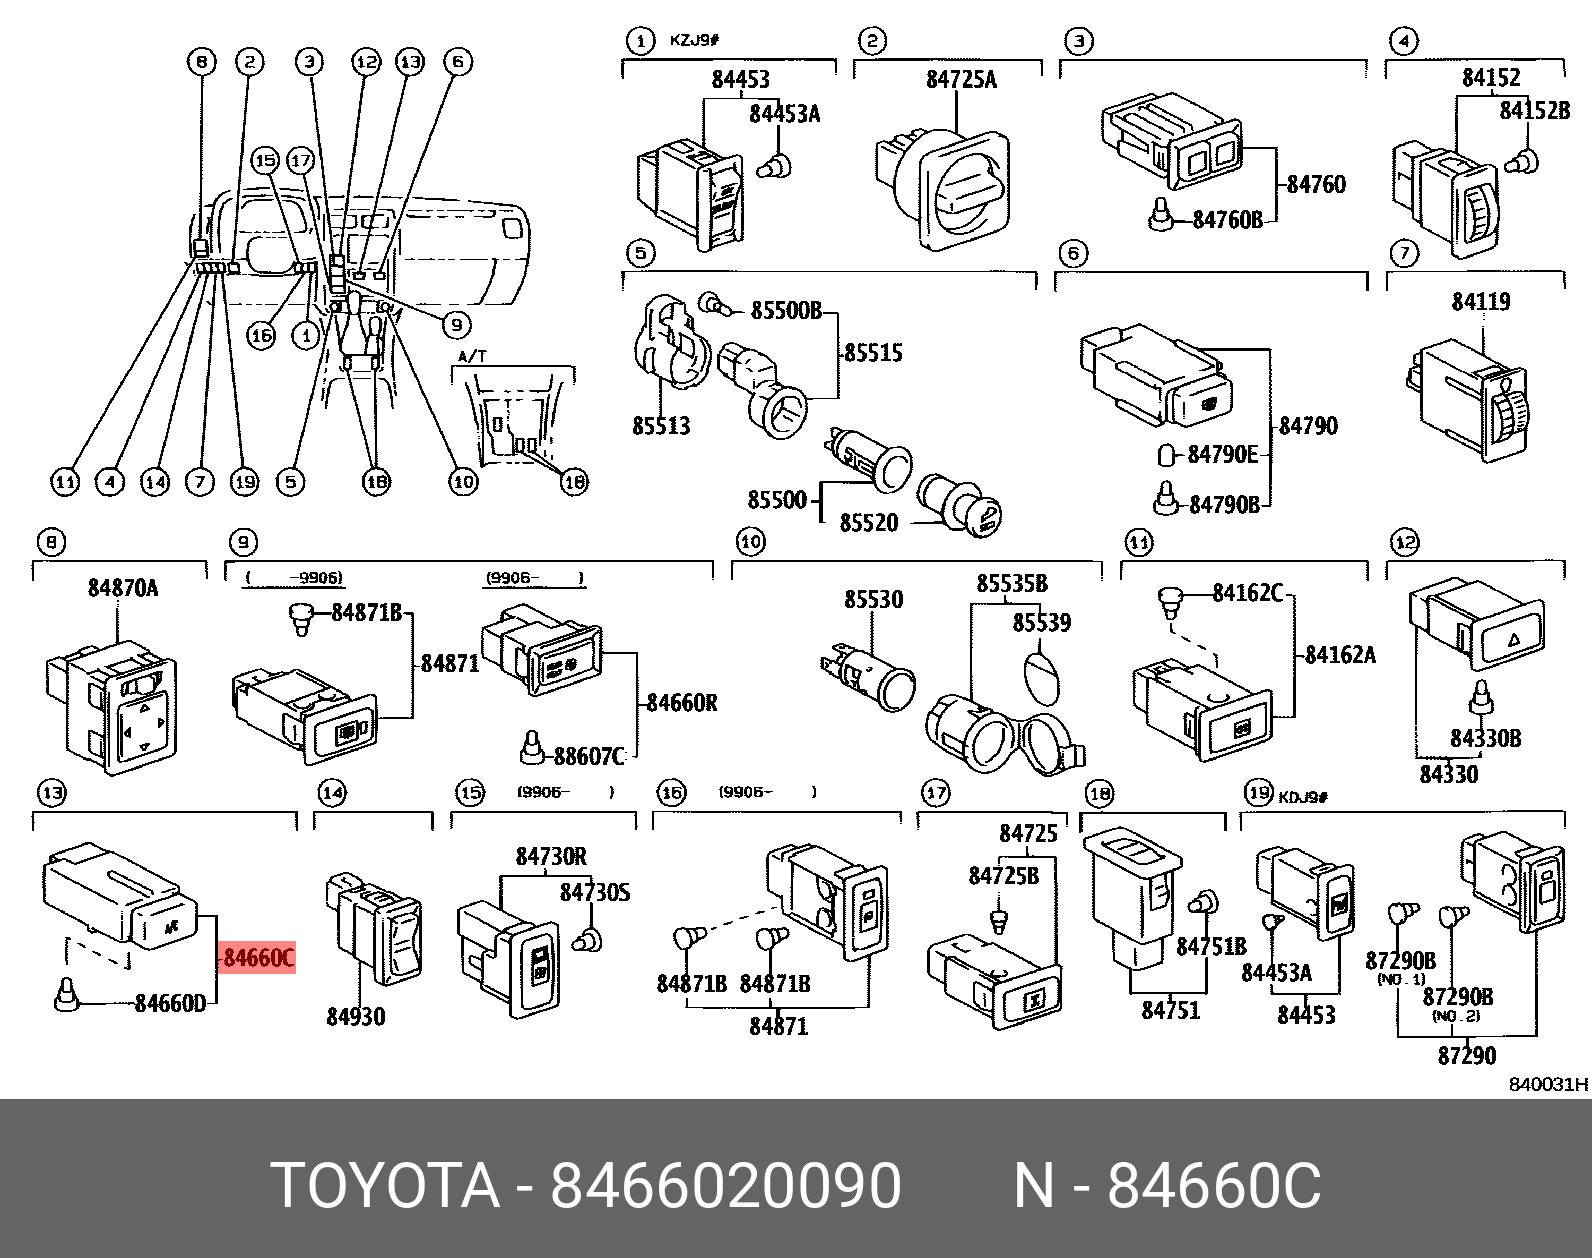 COROLLA LEVIN 198705 - 199106, SWITCH, COOLER